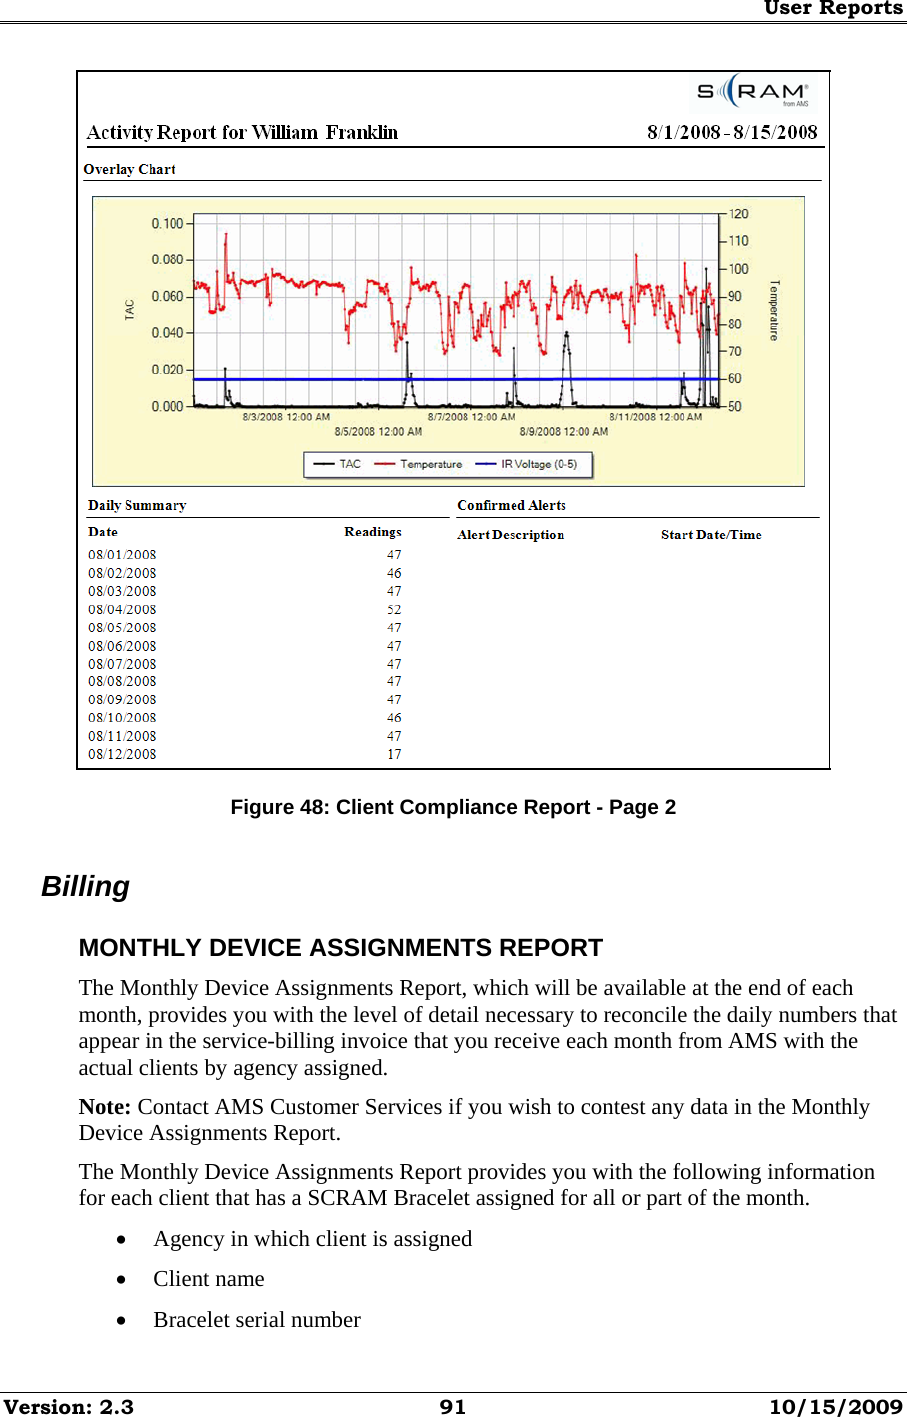 User Reports Version: 2.3  91  10/15/2009  Figure 48: Client Compliance Report - Page 2 Billing MONTHLY DEVICE ASSIGNMENTS REPORT The Monthly Device Assignments Report, which will be available at the end of each month, provides you with the level of detail necessary to reconcile the daily numbers that appear in the service-billing invoice that you receive each month from AMS with the actual clients by agency assigned. Note: Contact AMS Customer Services if you wish to contest any data in the Monthly Device Assignments Report. The Monthly Device Assignments Report provides you with the following information for each client that has a SCRAM Bracelet assigned for all or part of the month. • Agency in which client is assigned • Client name • Bracelet serial number 